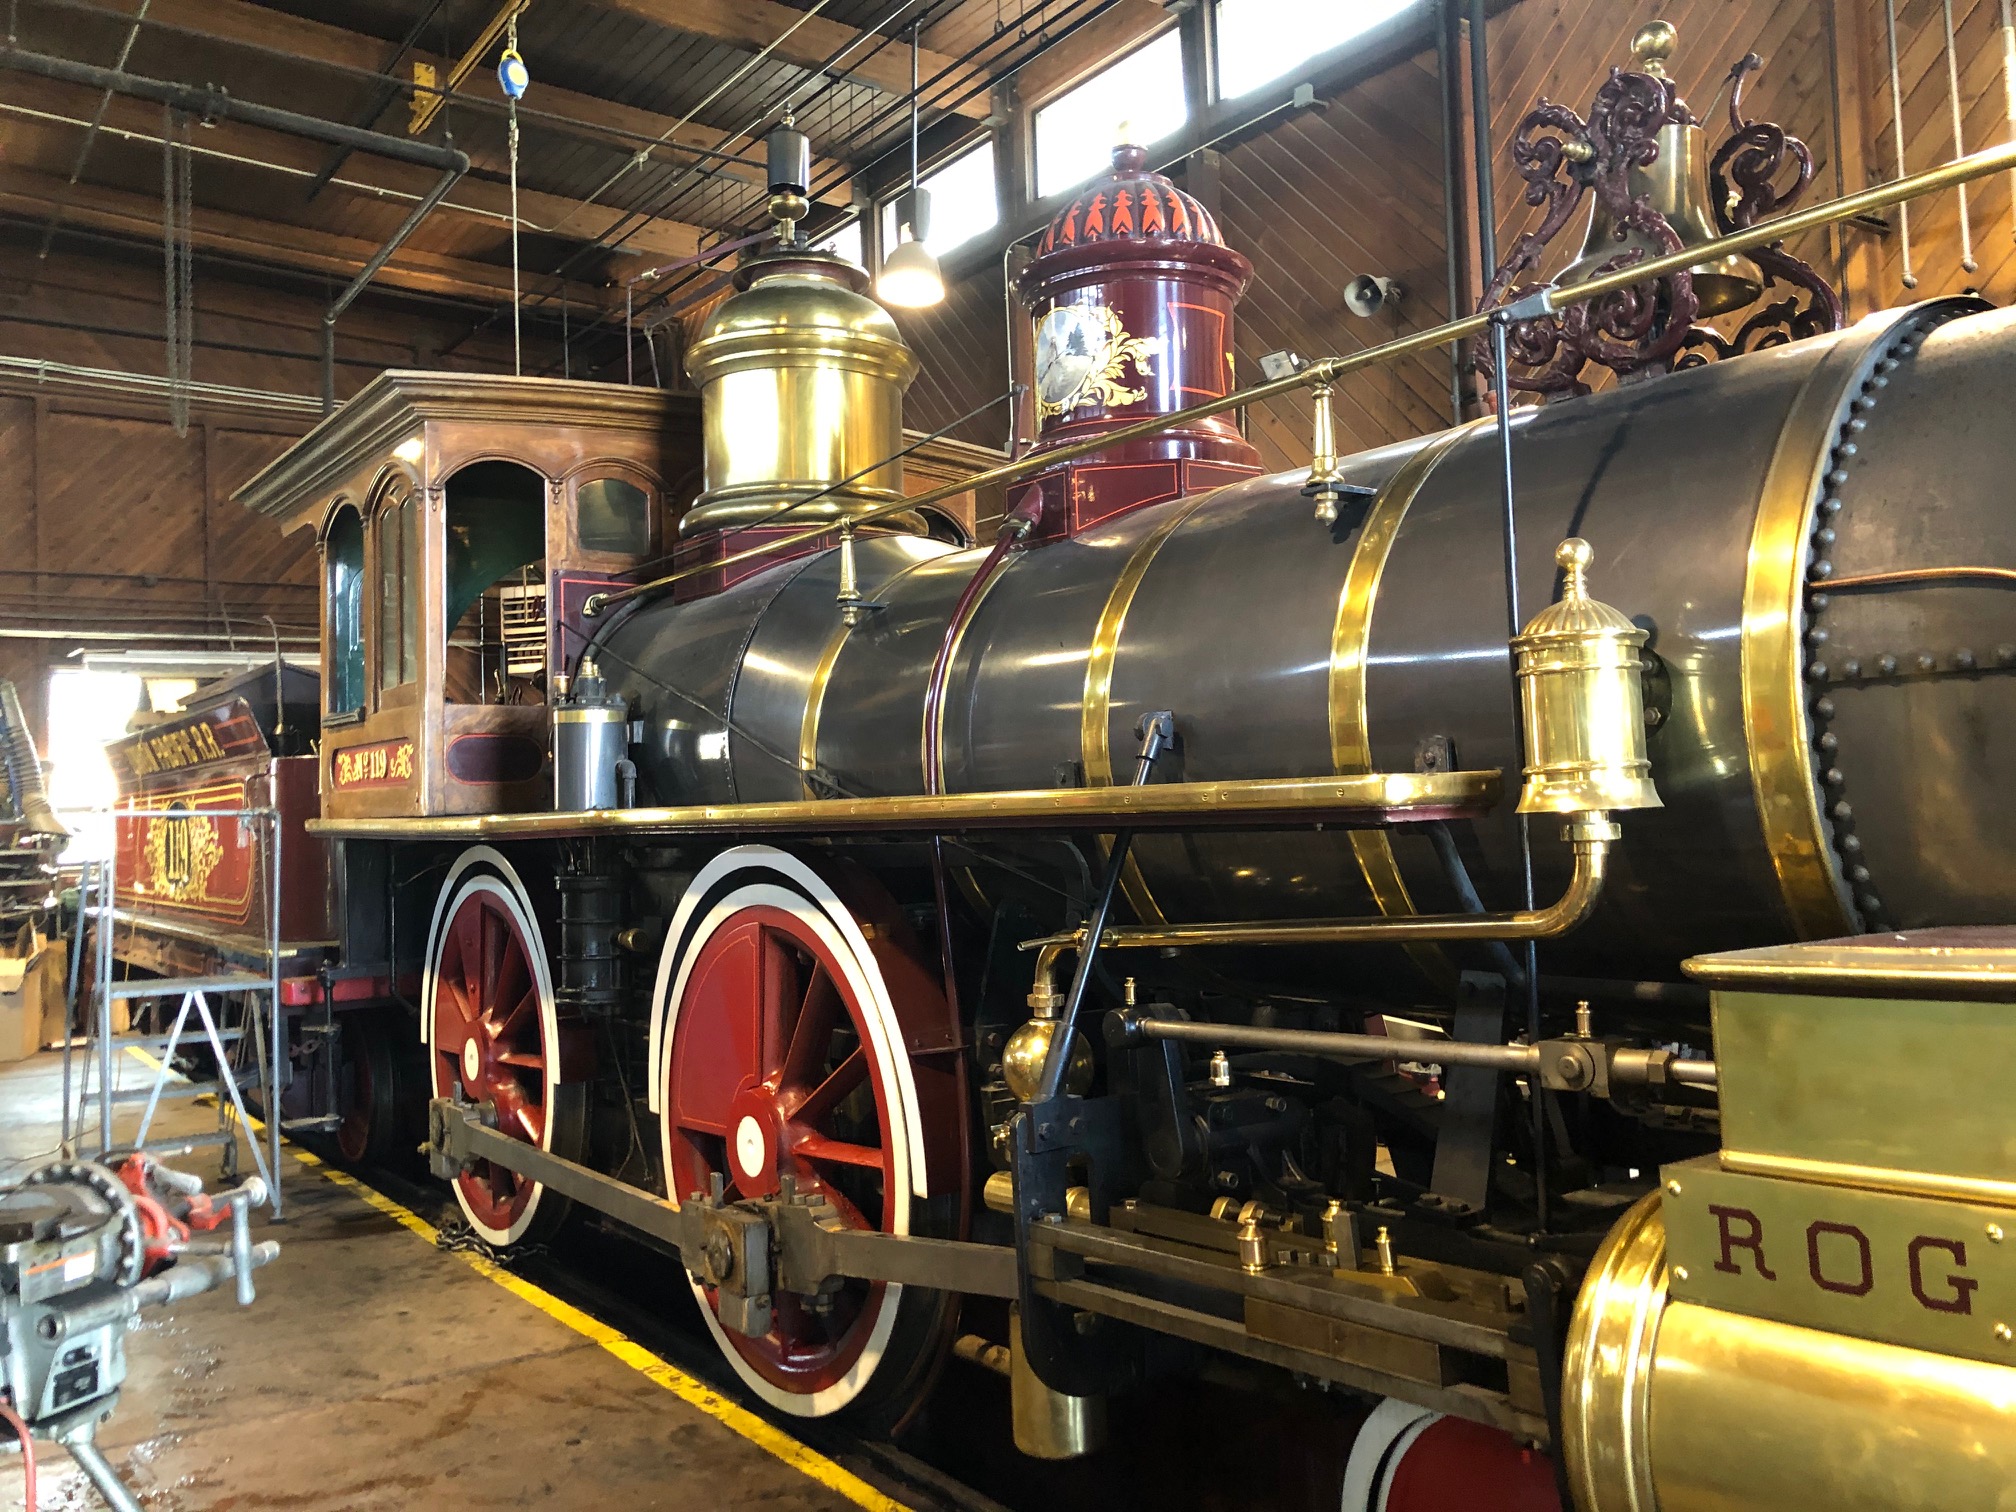 Engine #119 from the East – Piersons' Rolling Retirement